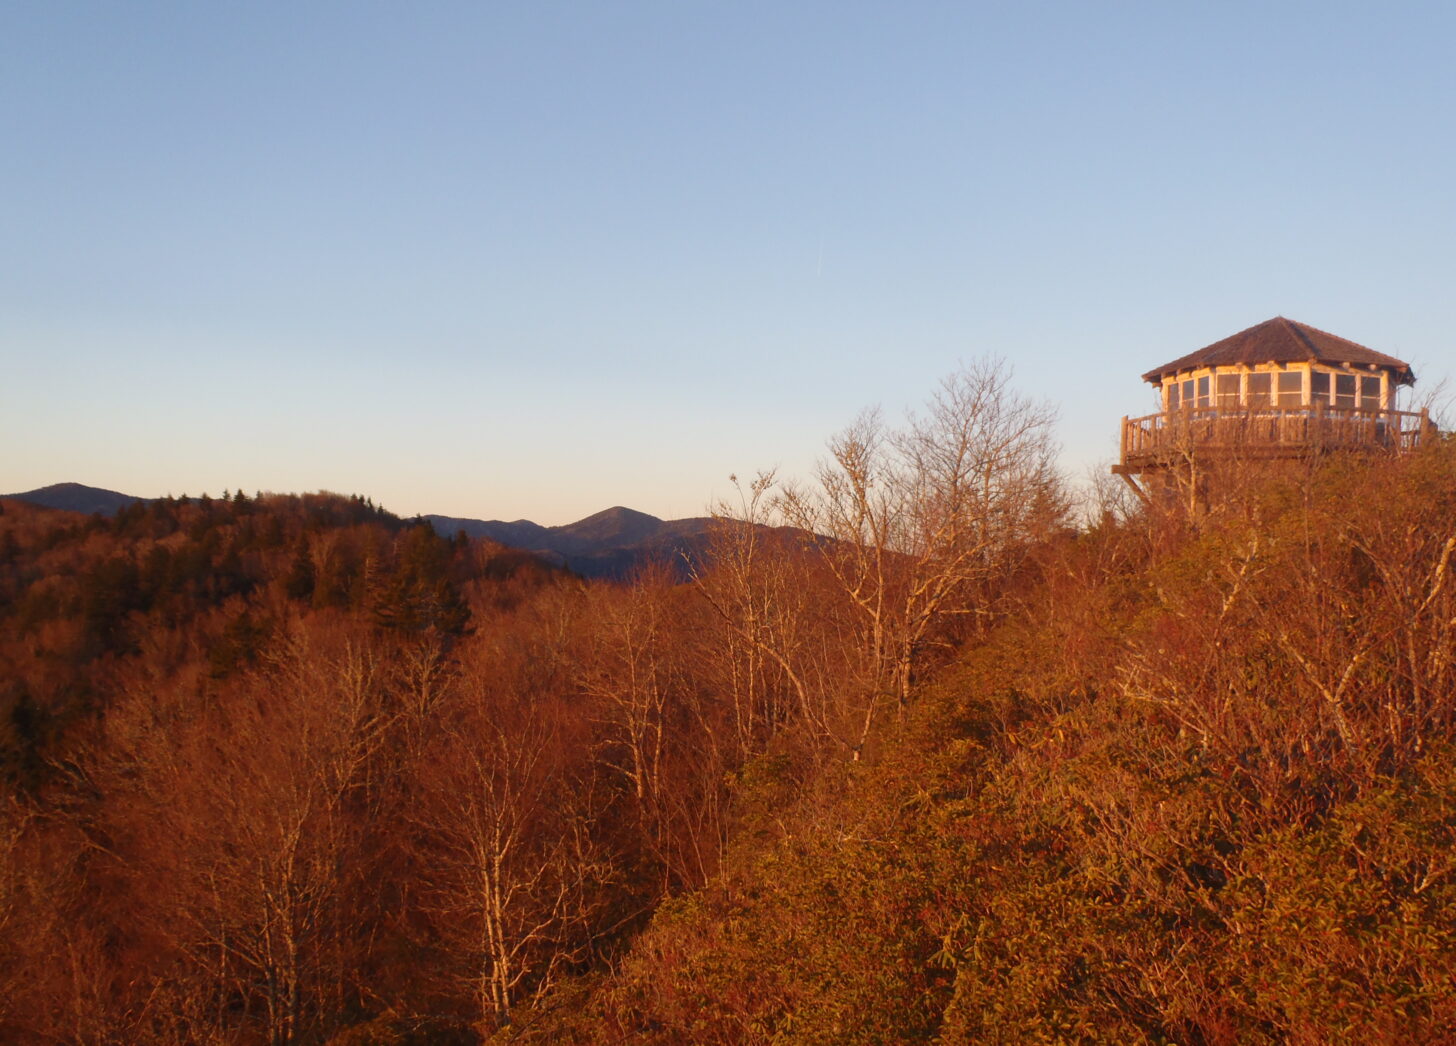 A lookout tower with mountains in the background.